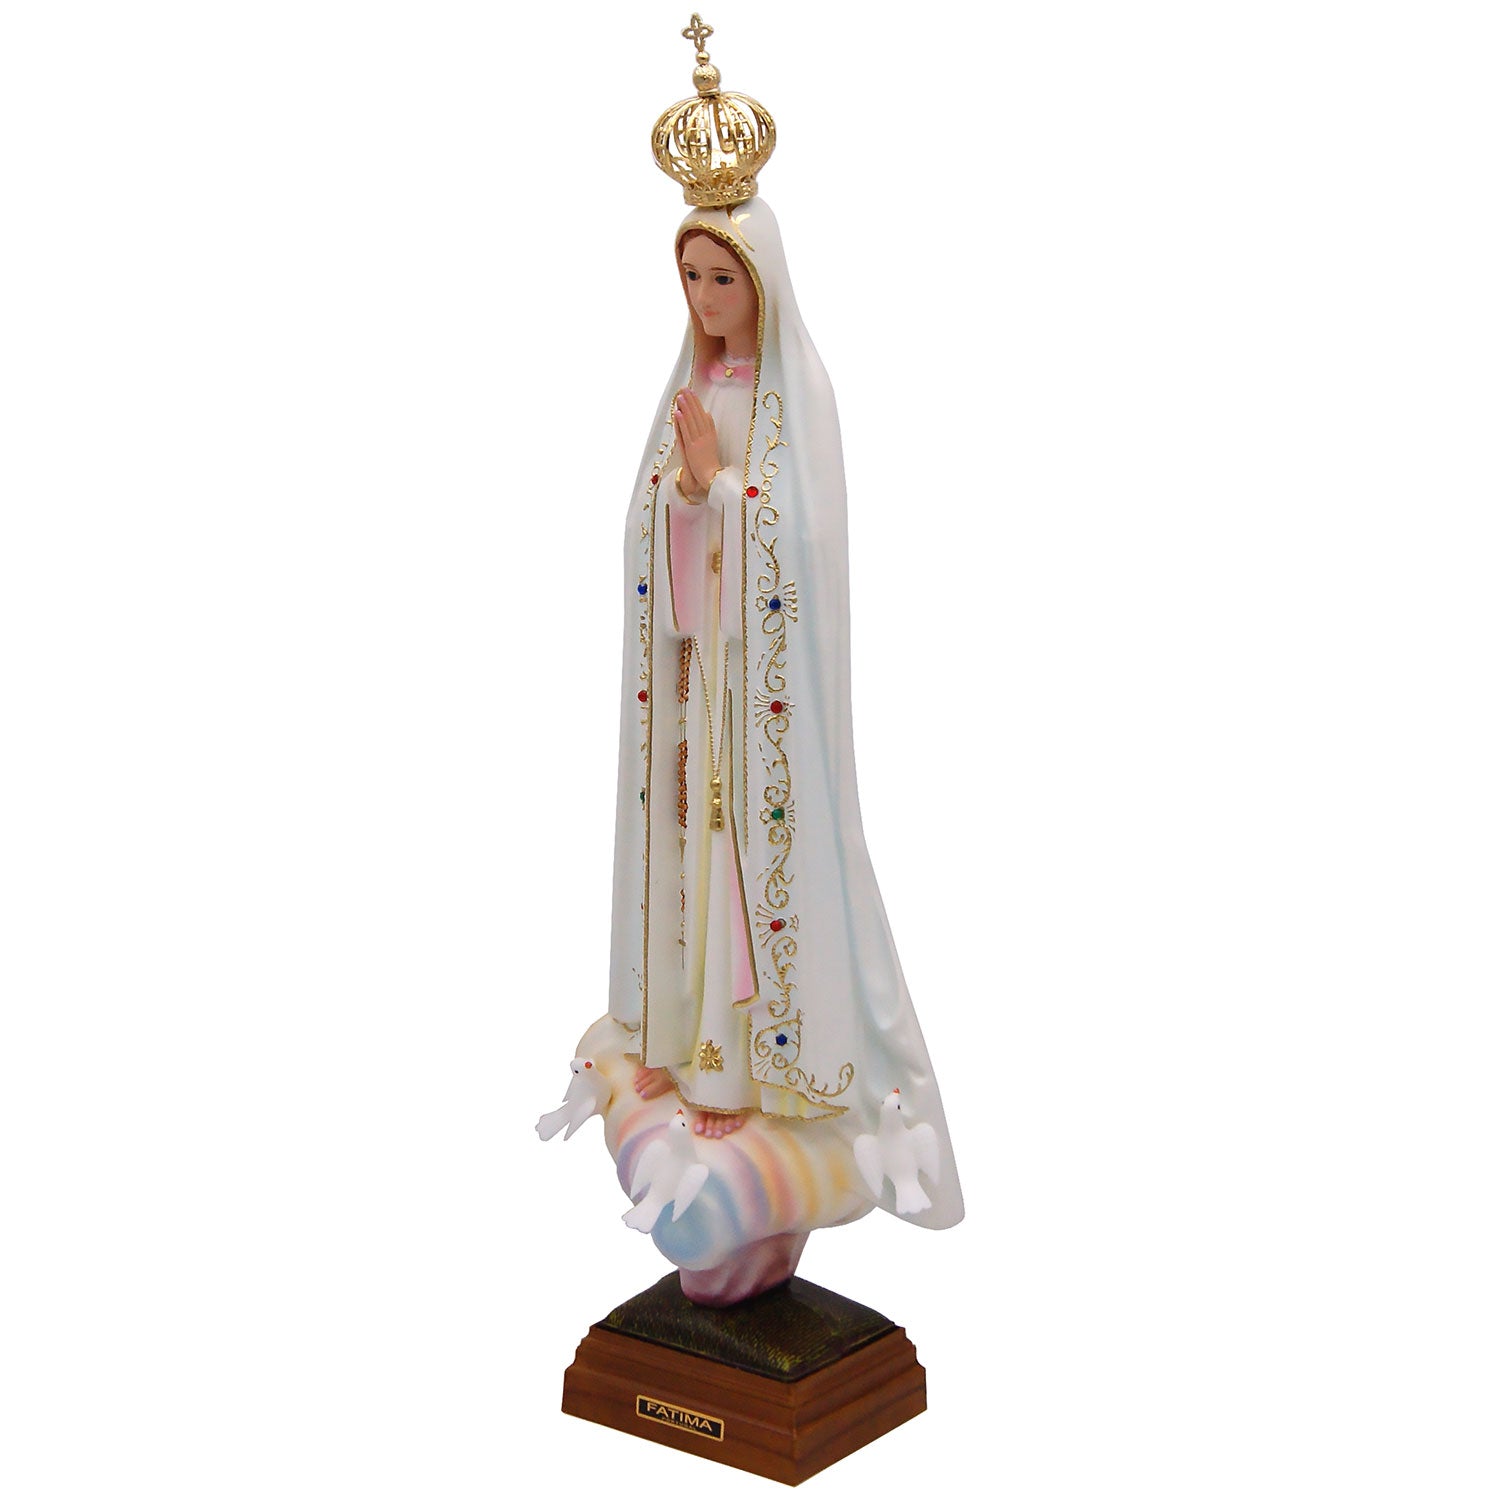 24 Inch Glass Eyes Our Lady of Fatima Statue Made in Portugal